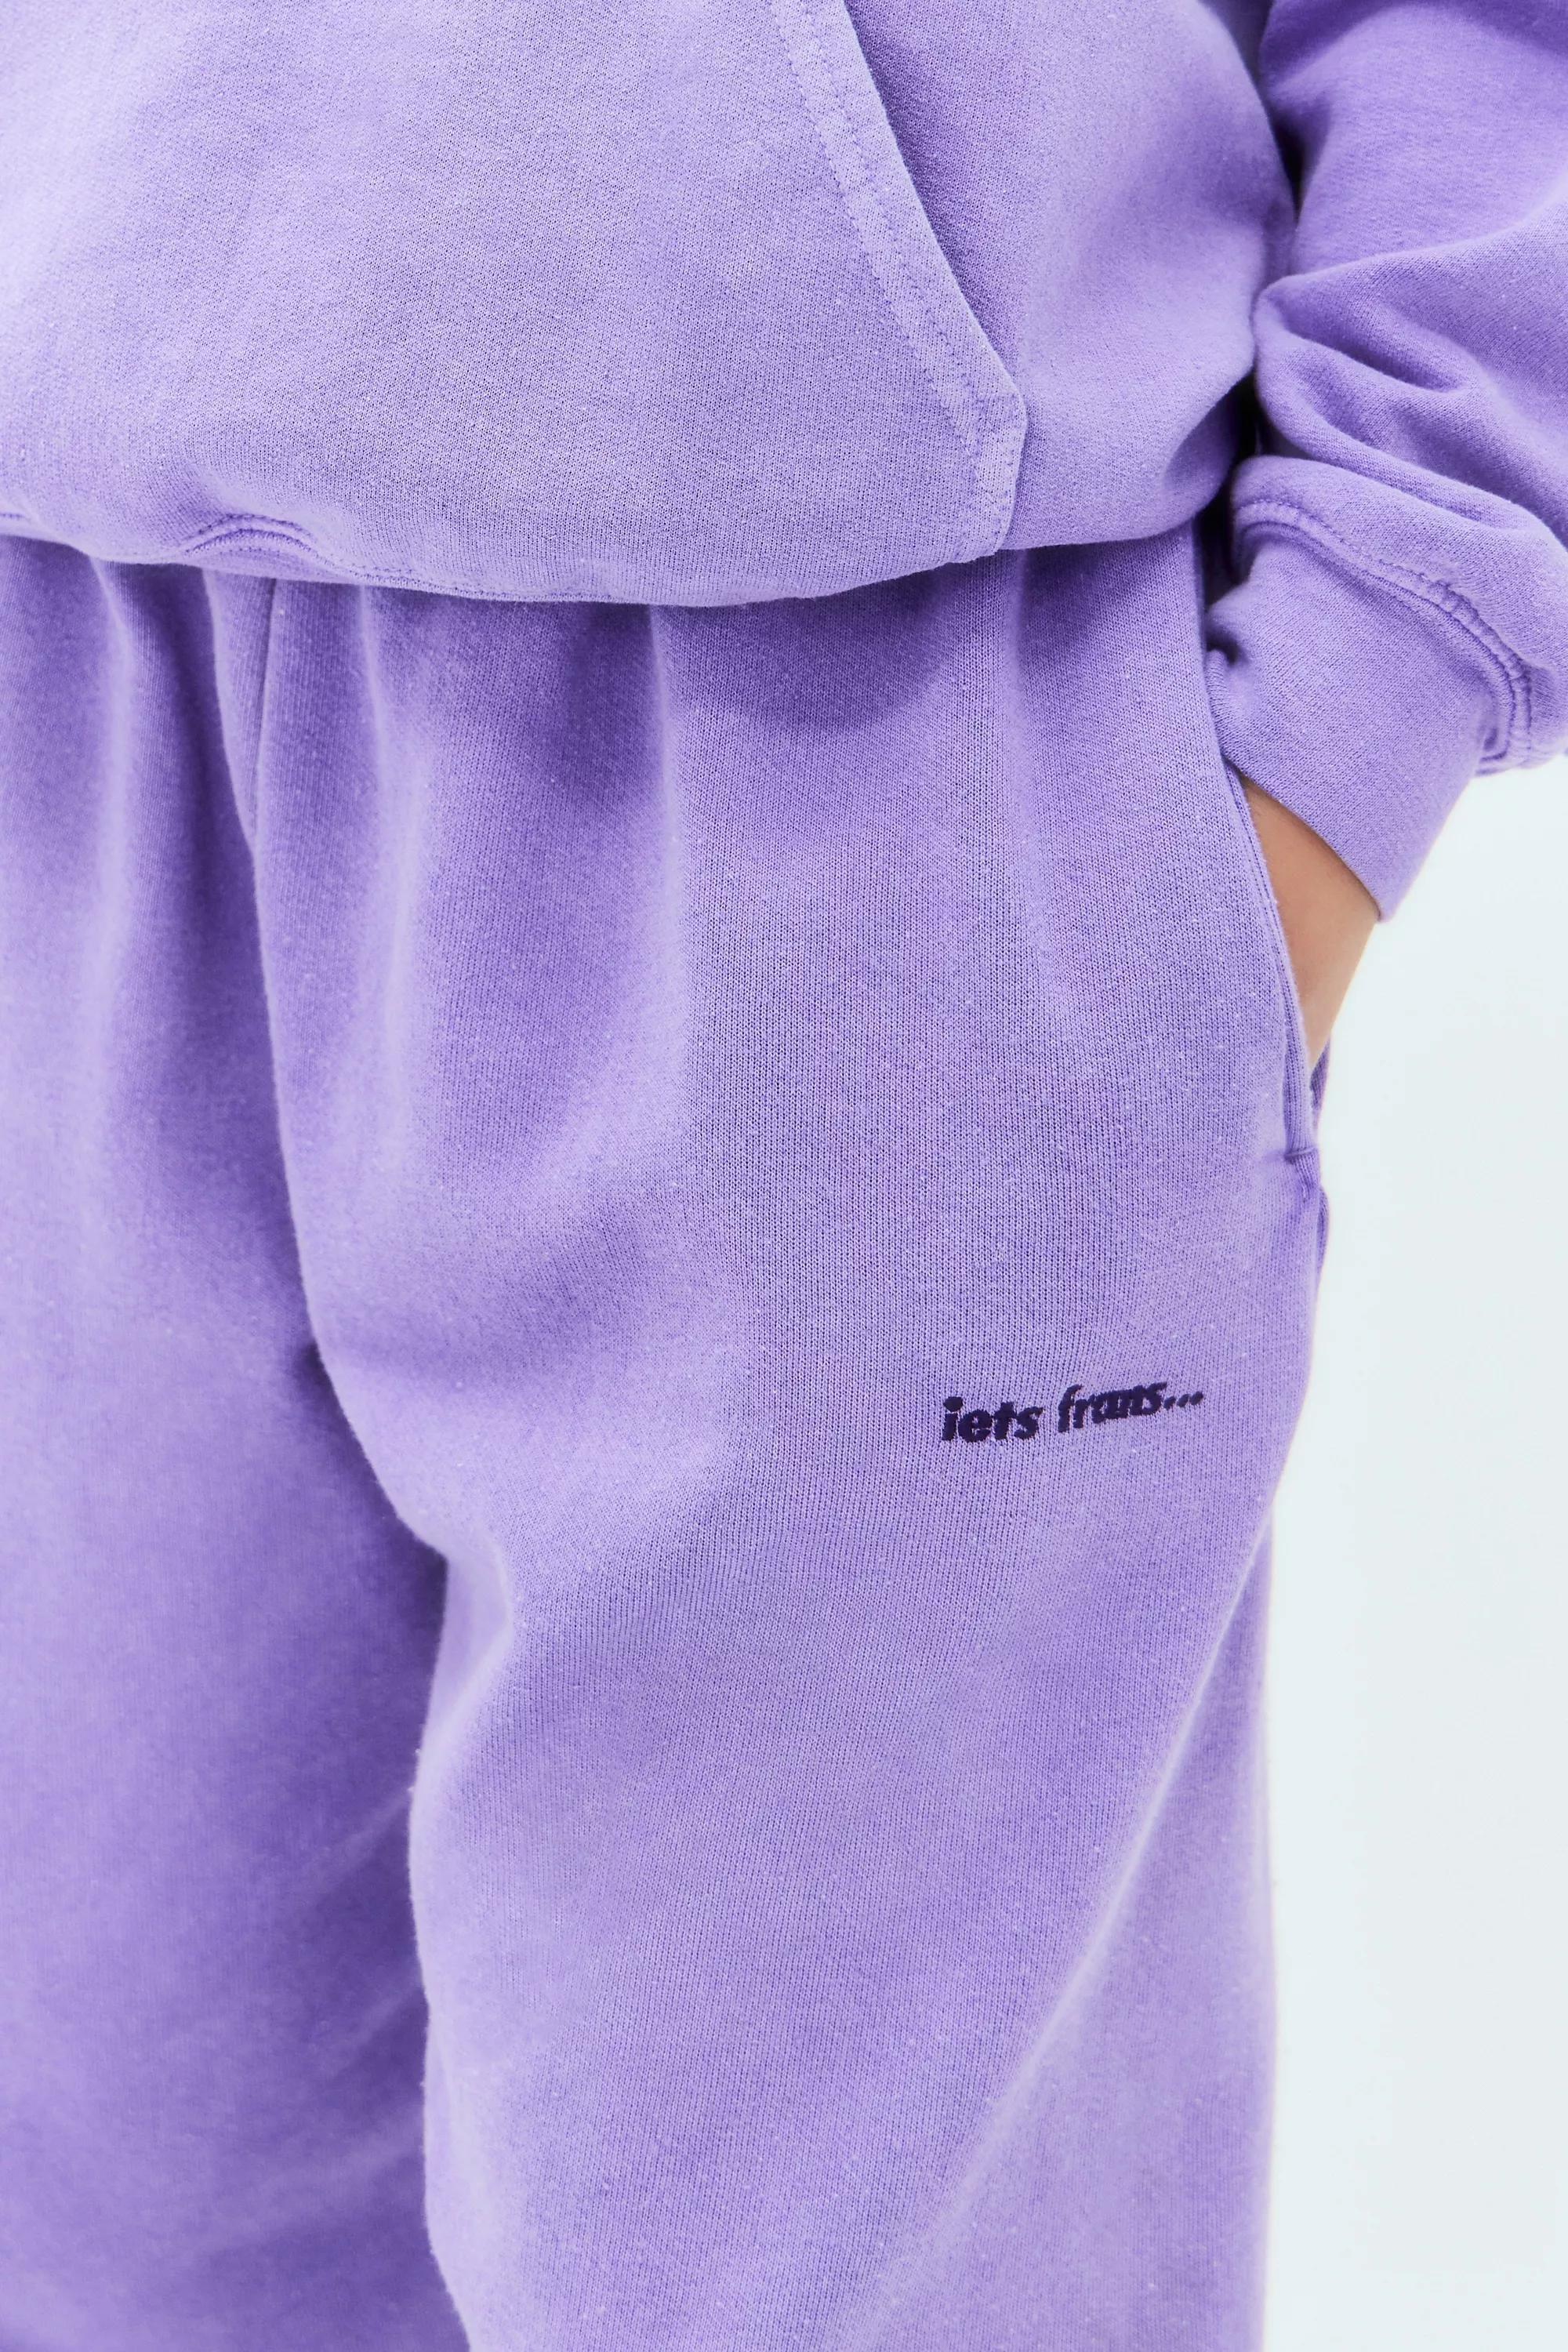 Urban Outfitters - Lilac Iets Frans... Cuffed Joggers